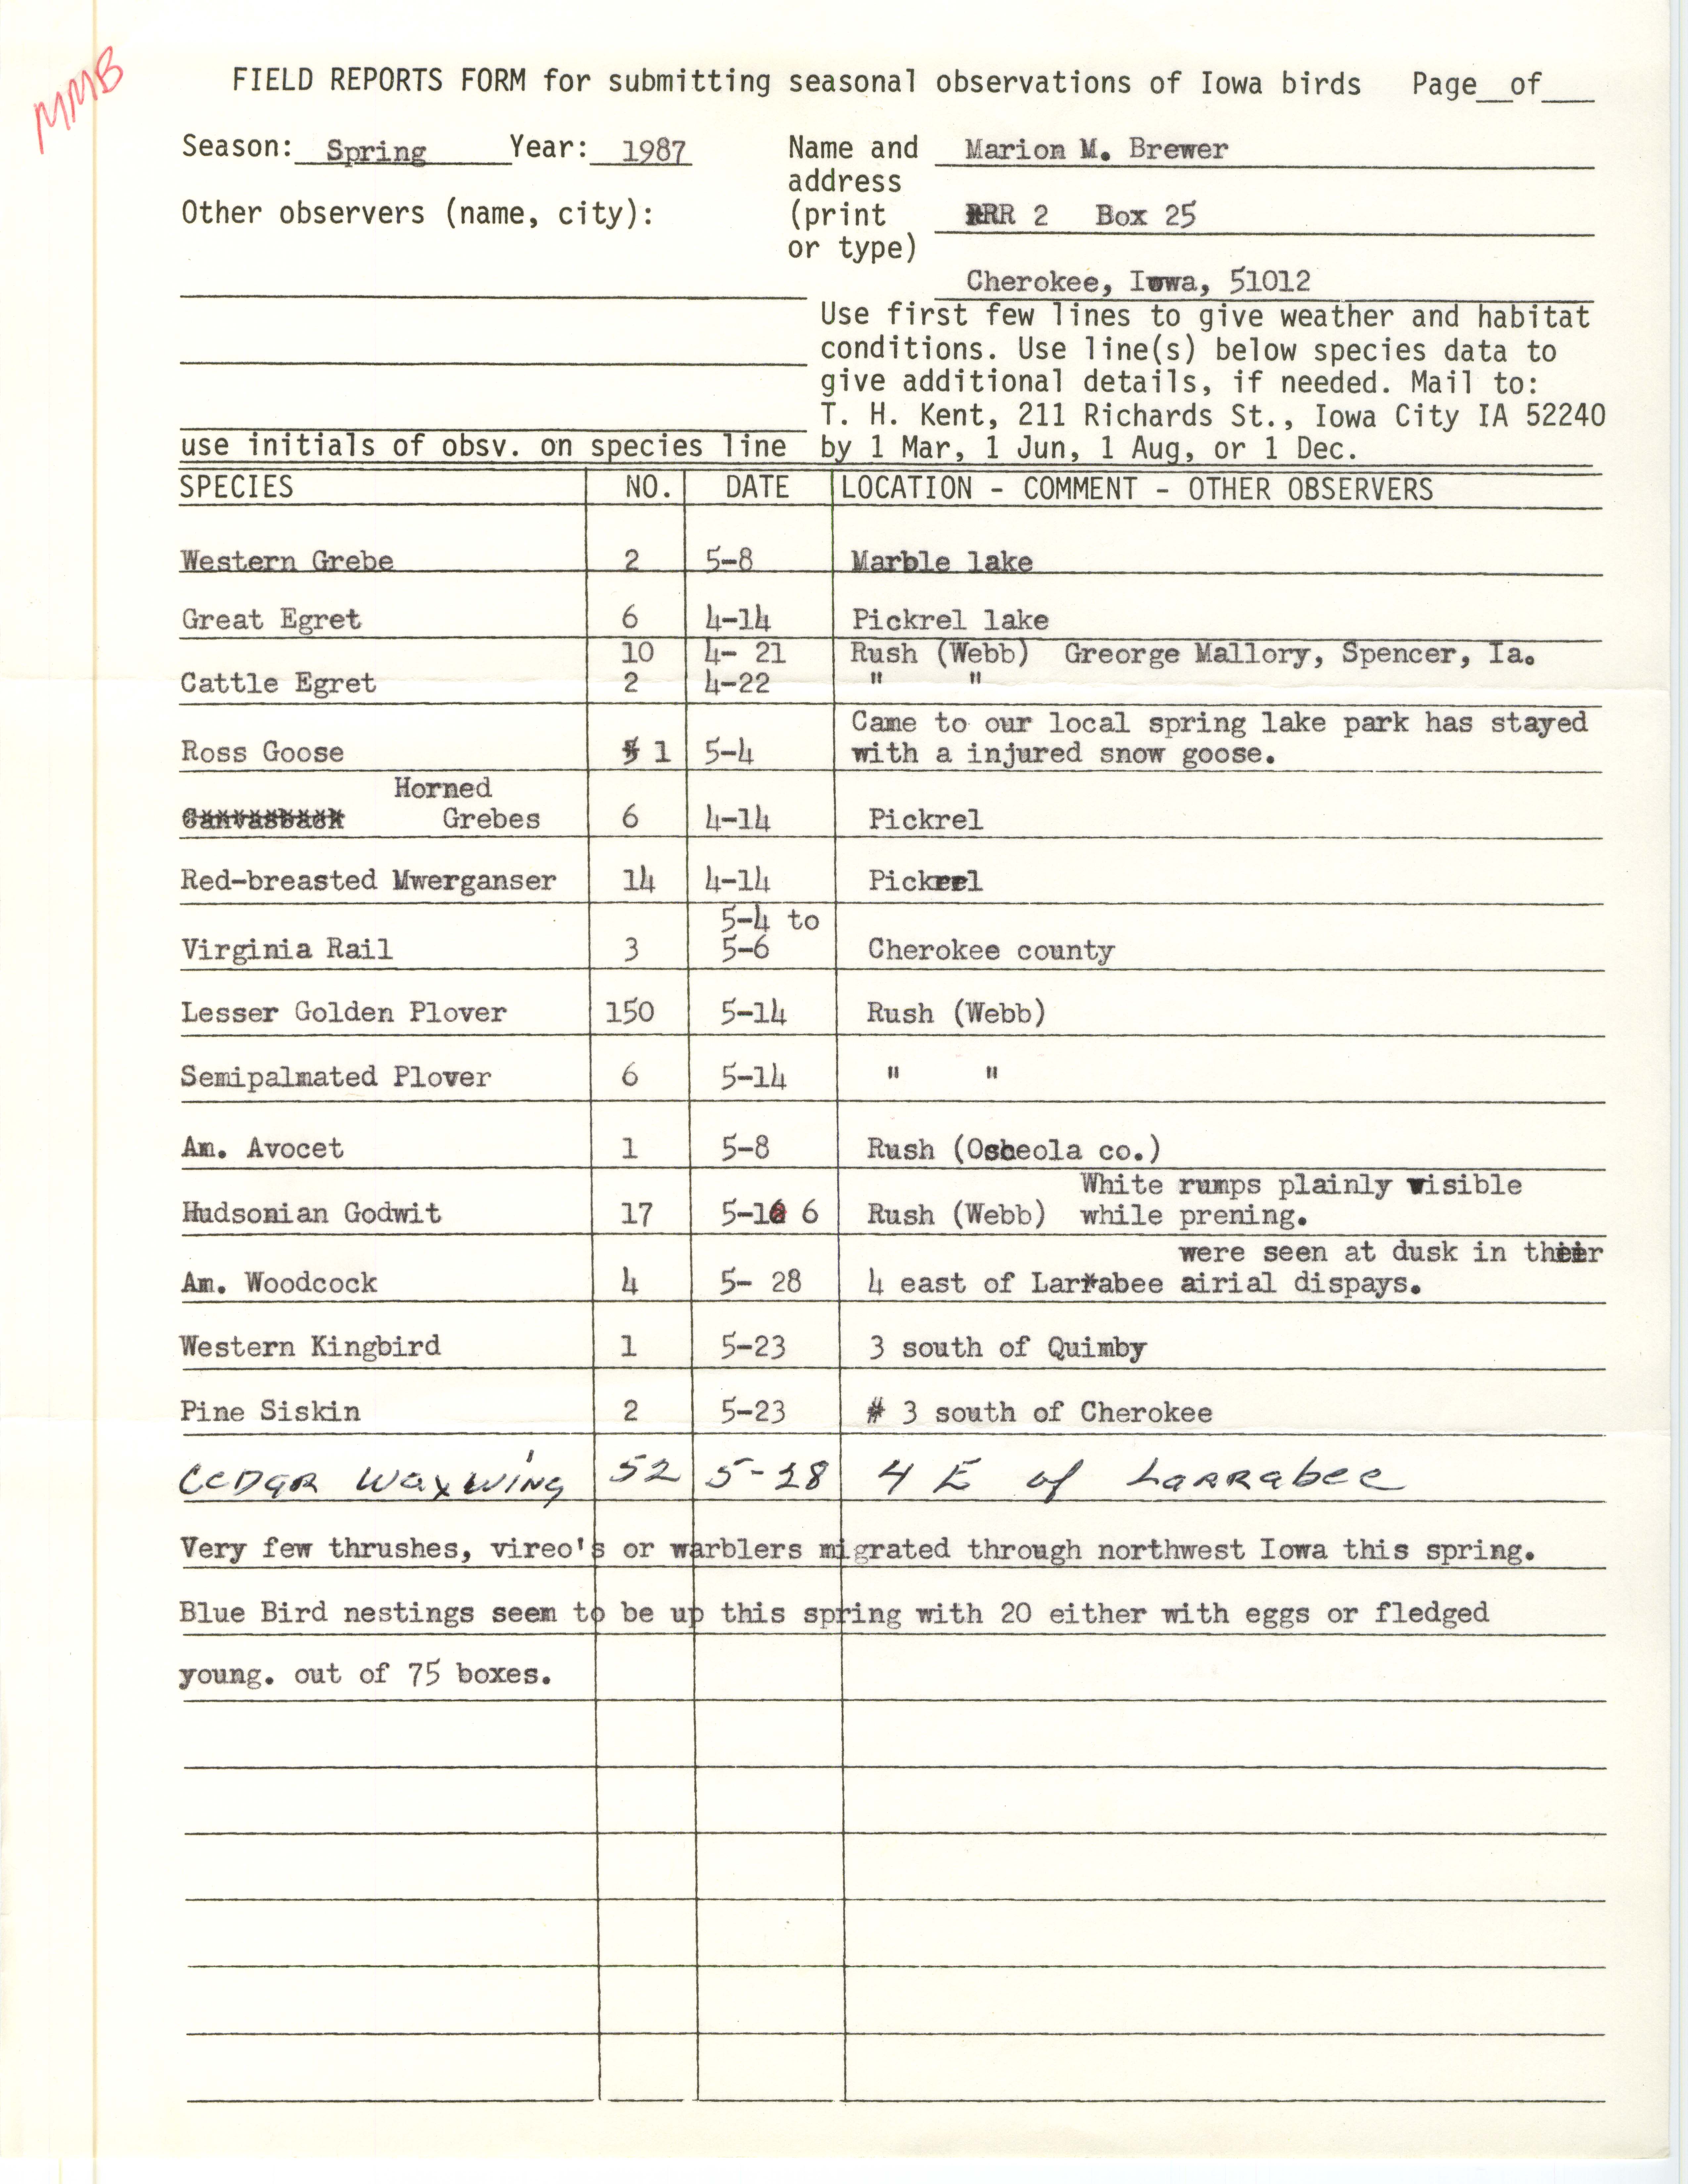 Field reports form for submitting seasonal observations of Iowa birds, Marion M. Brewer, spring 1987